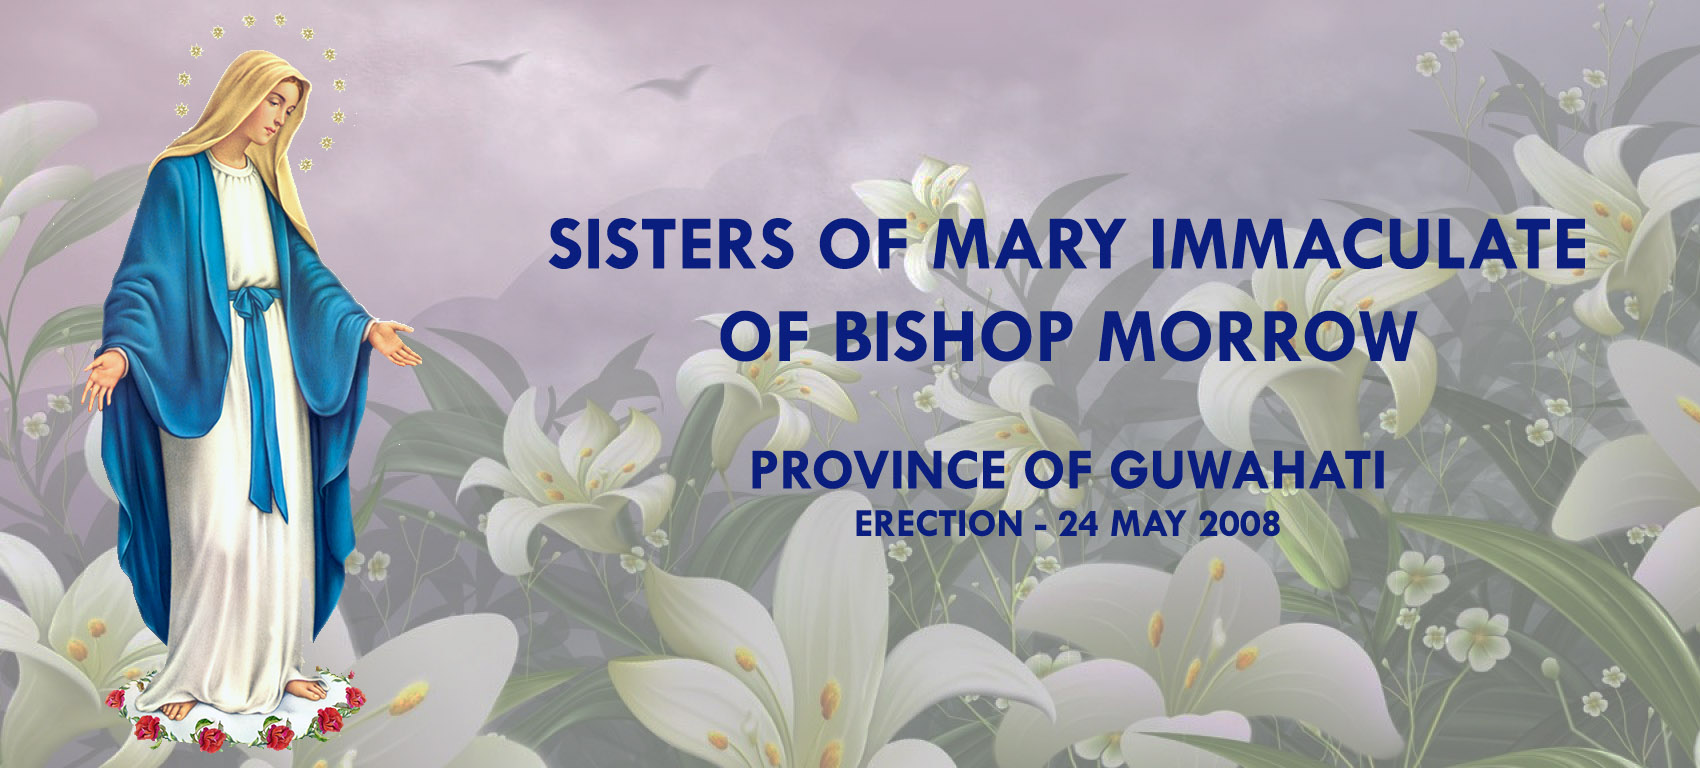 Welcome to Sisters of Mary Immaculate, Guwahati Province